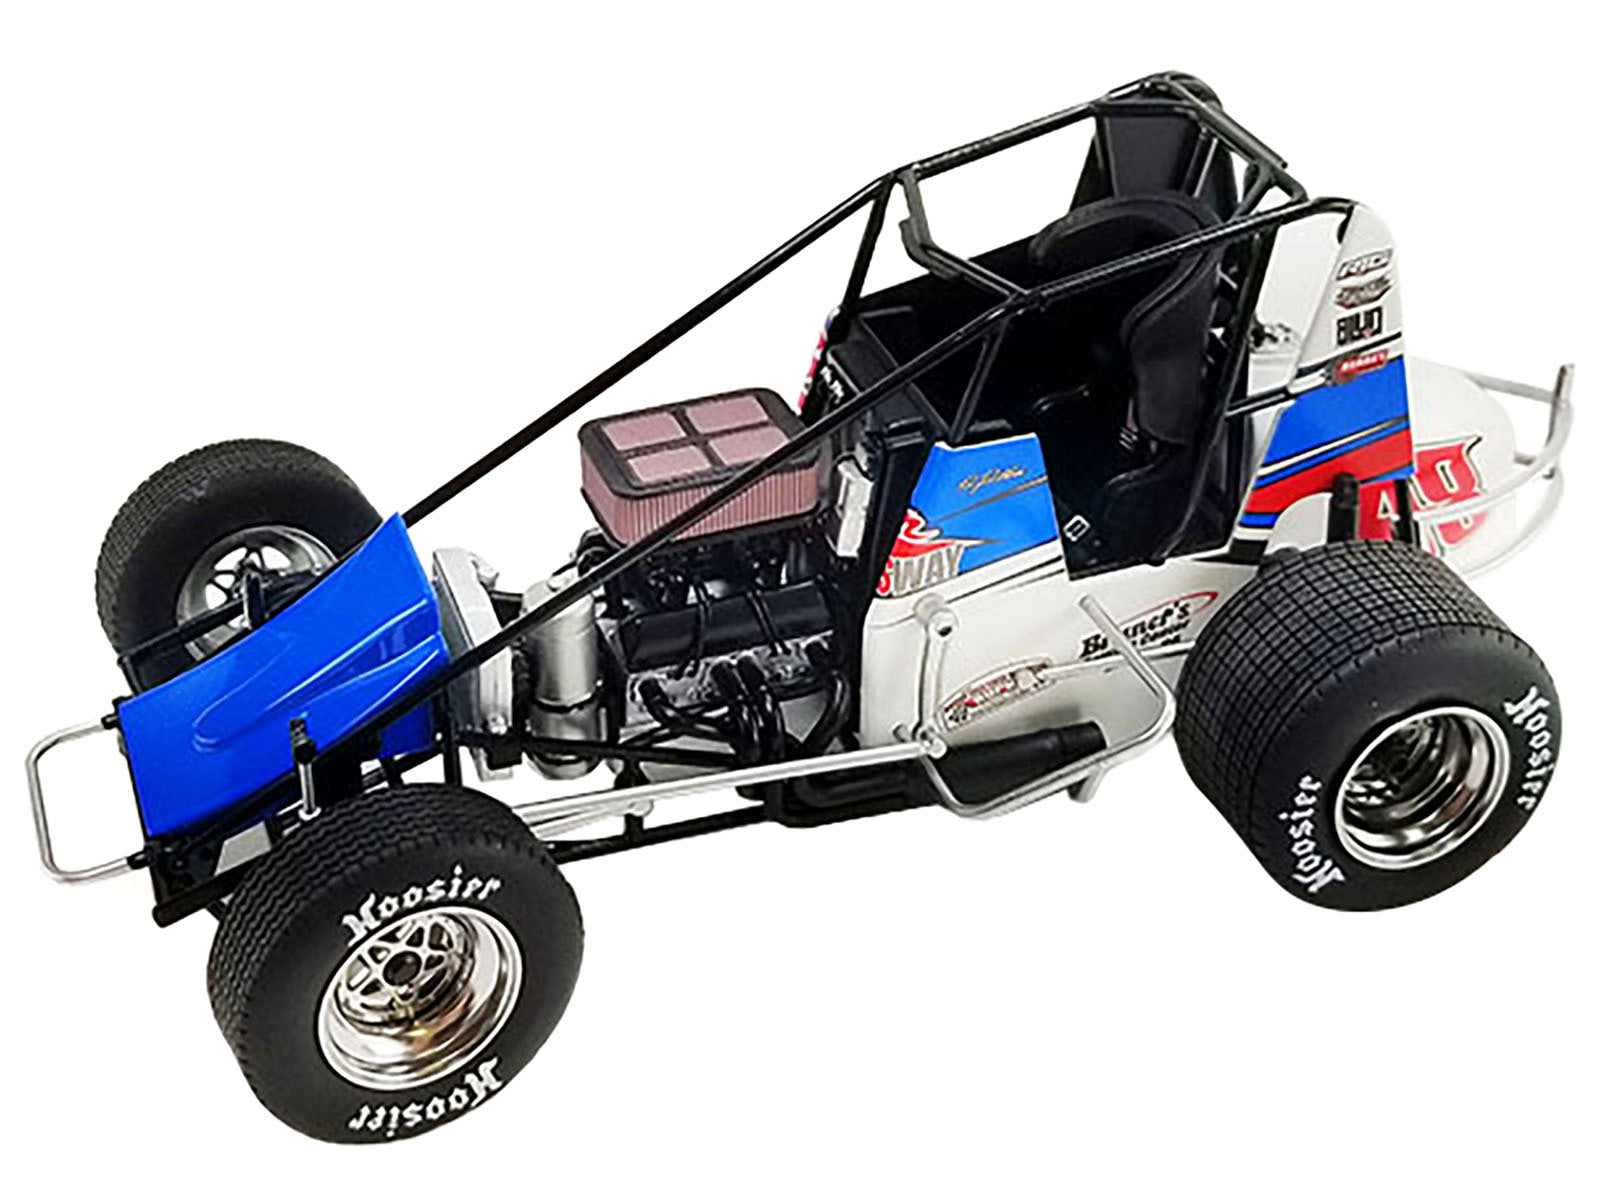 Winged Sprint Car #48 Danny Dietrich "Cochran Expressway - Weikert's Livestock Inc" Gary Kauffman Racing "World of Outlaws" (2023) 1/18 Diecast Model Car by ACME Acme